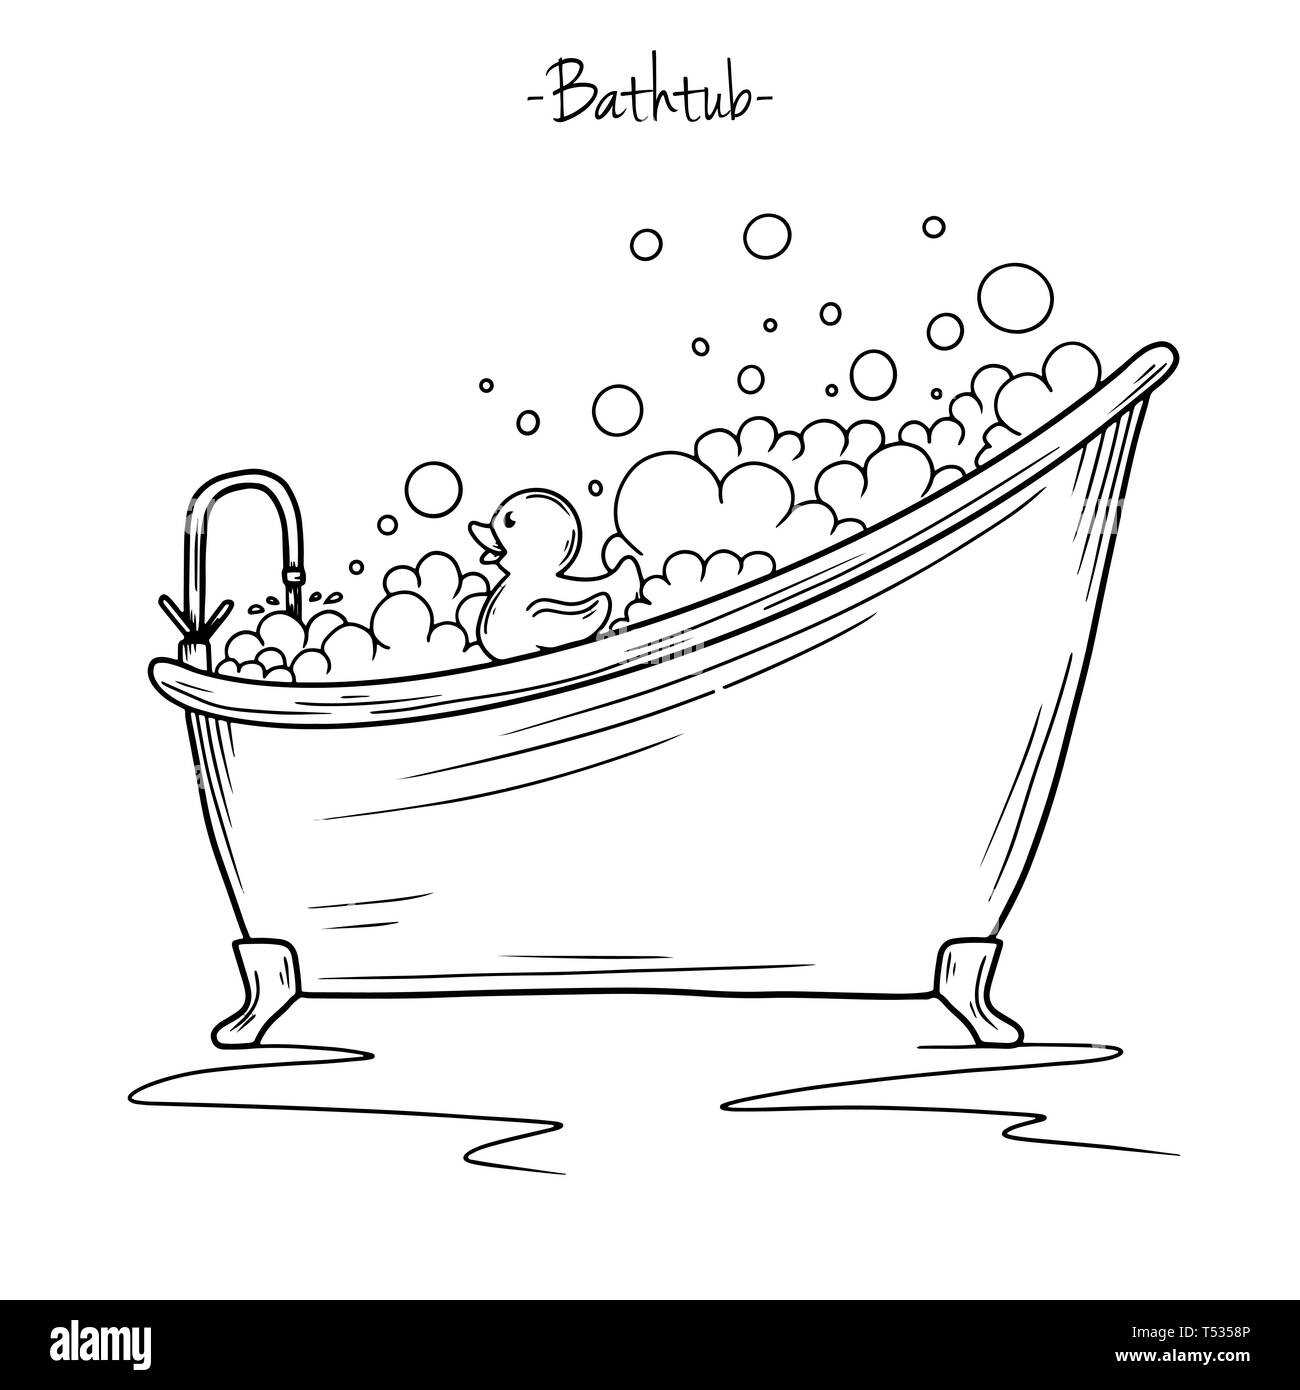 Sketch bath foam and rubber duck. Vector illustration in sketch style. Stock Vector